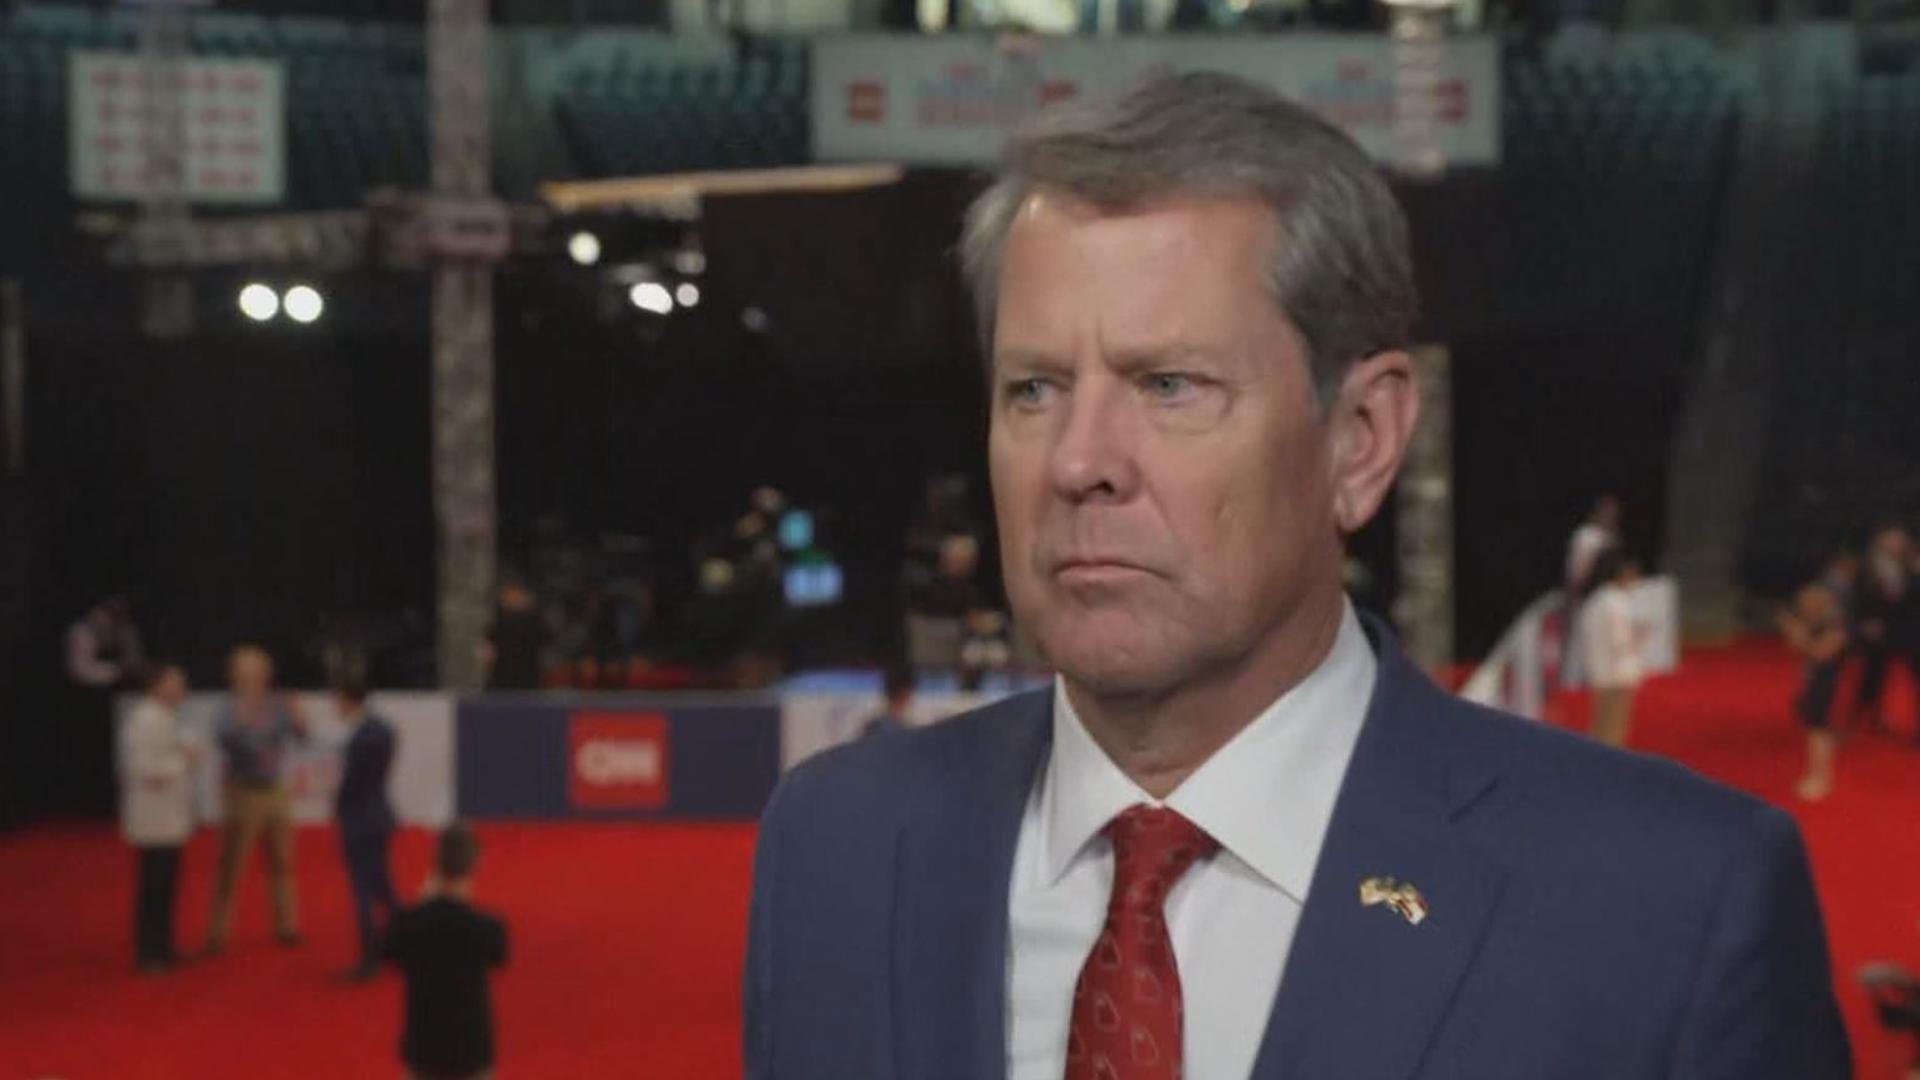 Gov. Kemp shared what he thinks would be the former president's best strategy.